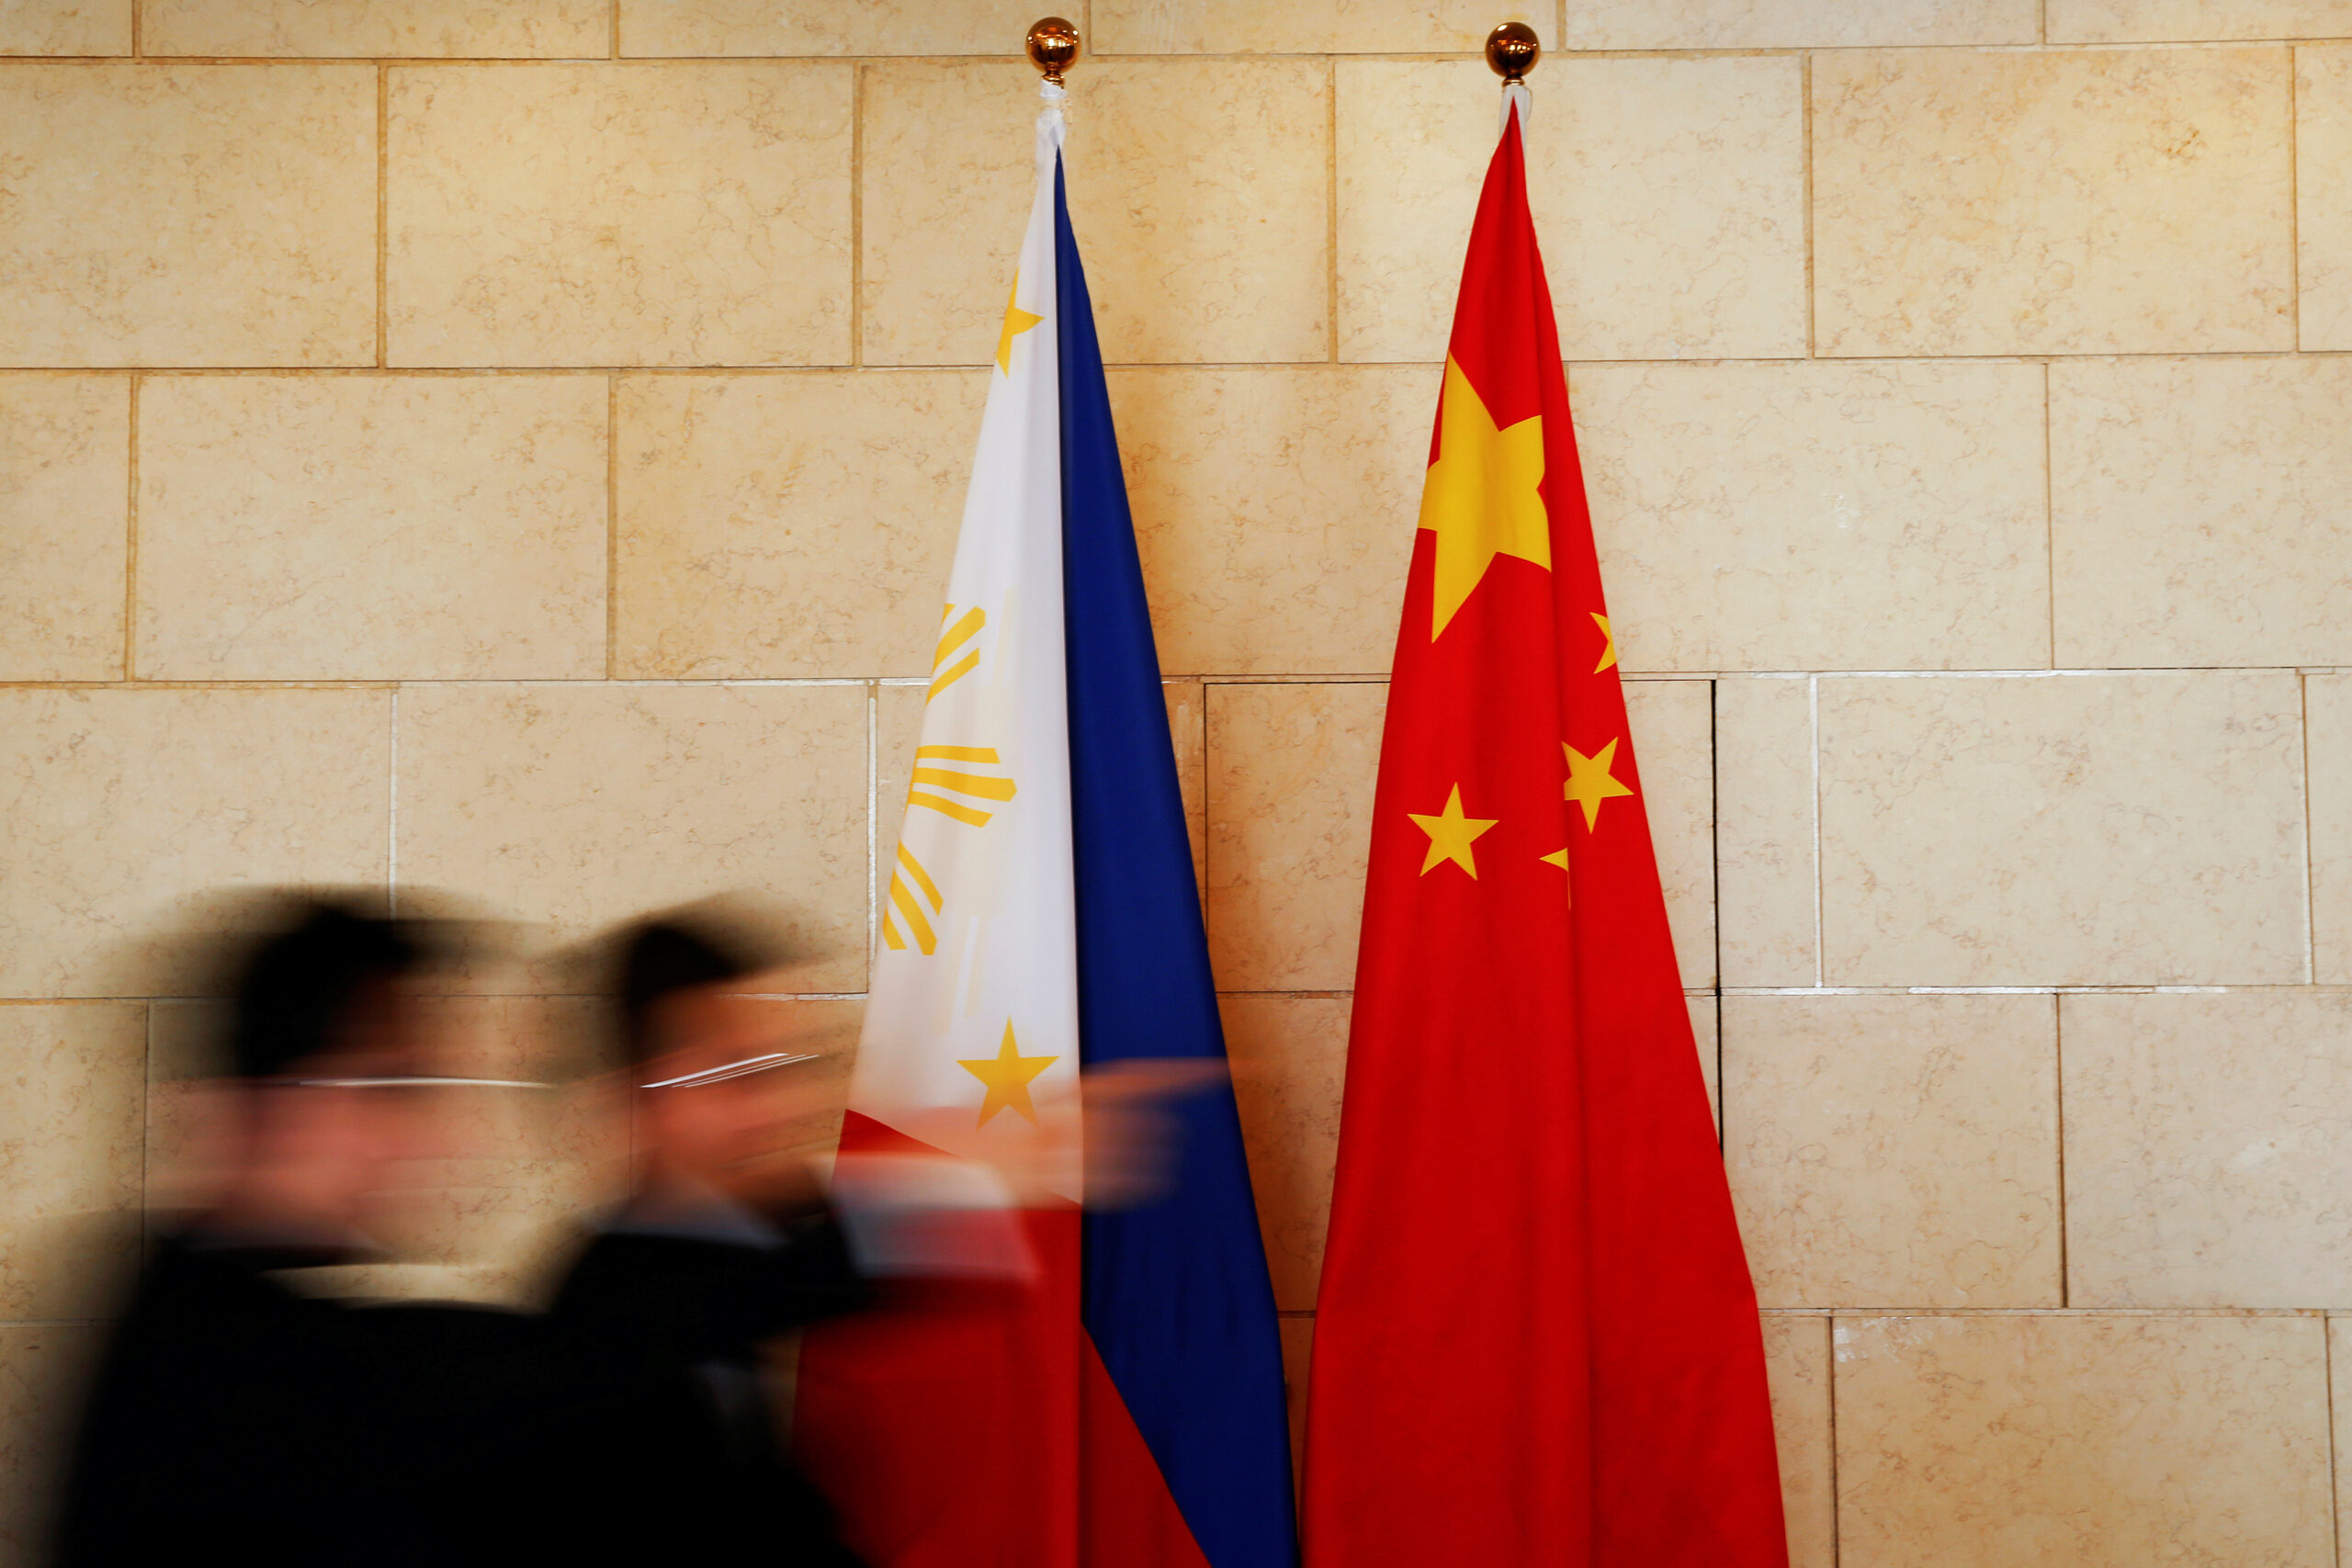 China says Philippines enlisted 'foreign forces' to patrol South China Sea